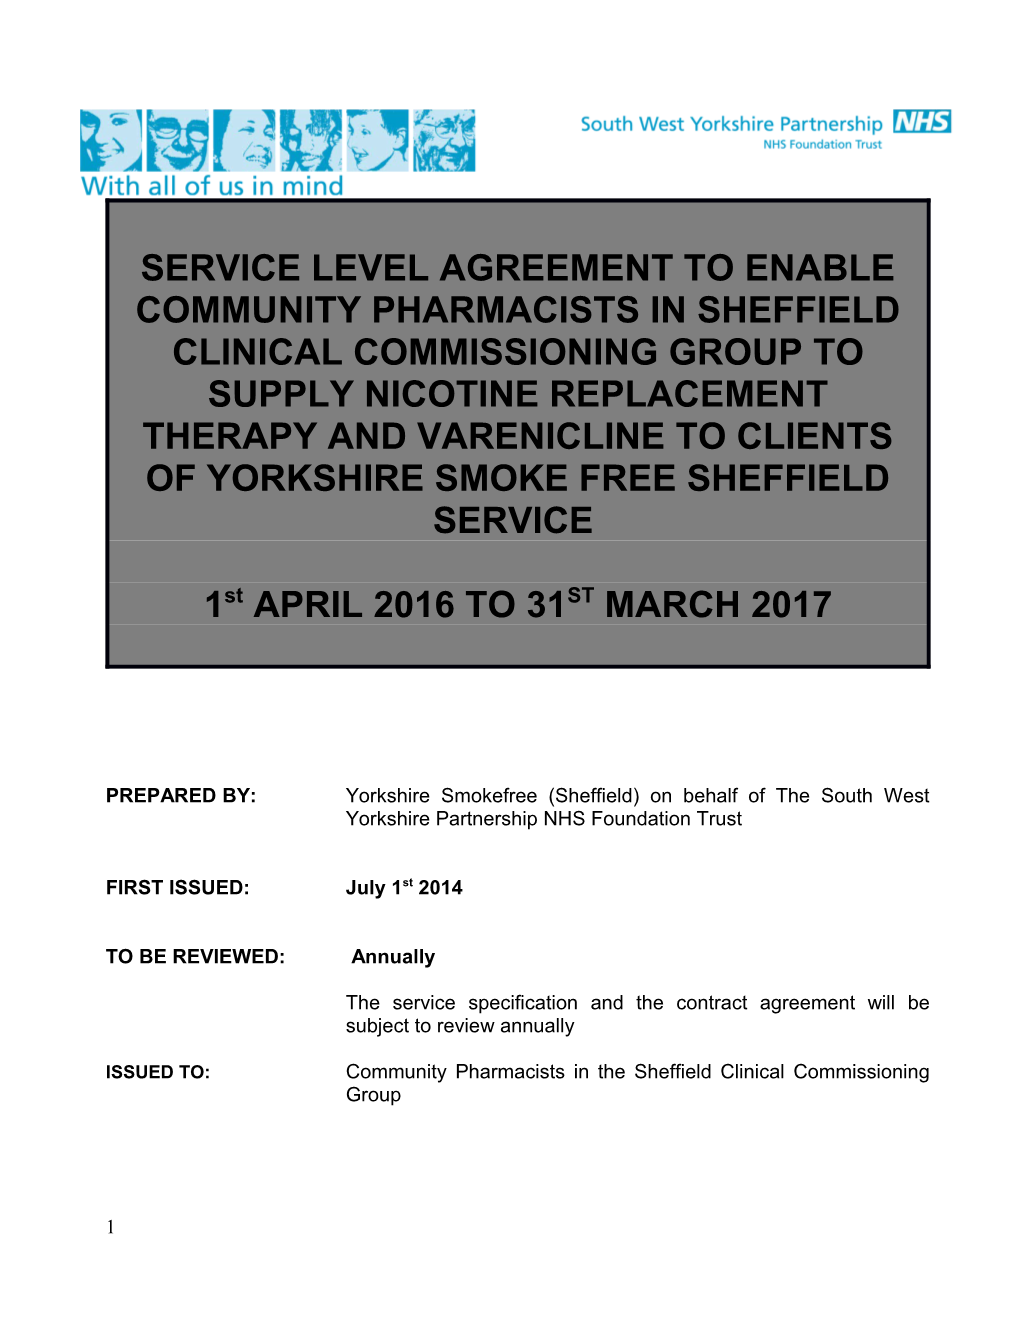 Service Level Agreement to Enable Community Pharmacists in Sheffield Clinical Commissioning